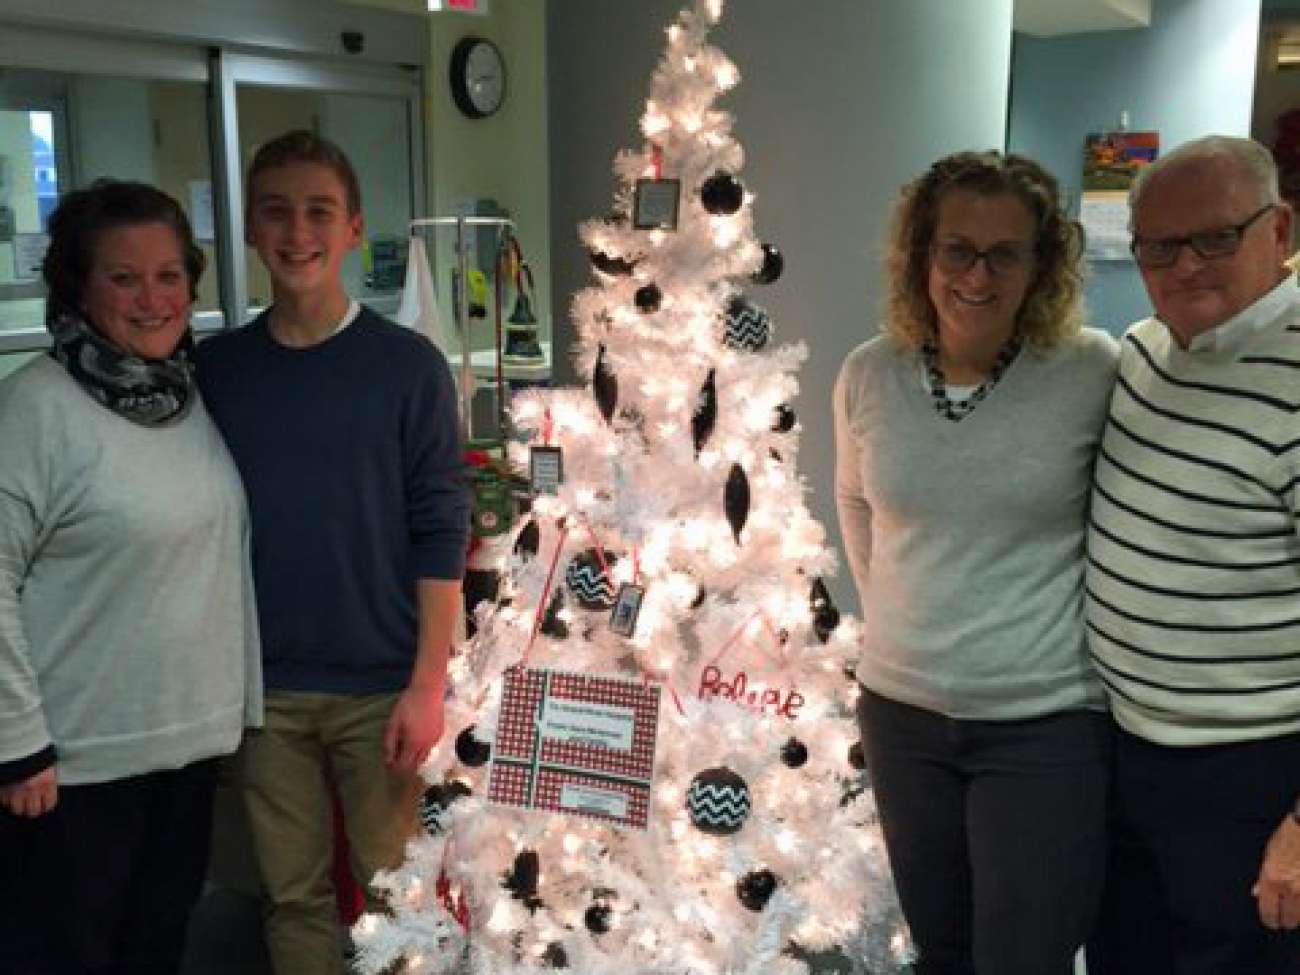 The people who made the tree happen include (left to right) Blake's mom Heather McLennan, Blake, his aunt Sara McLennan and his grandfather John McLennan